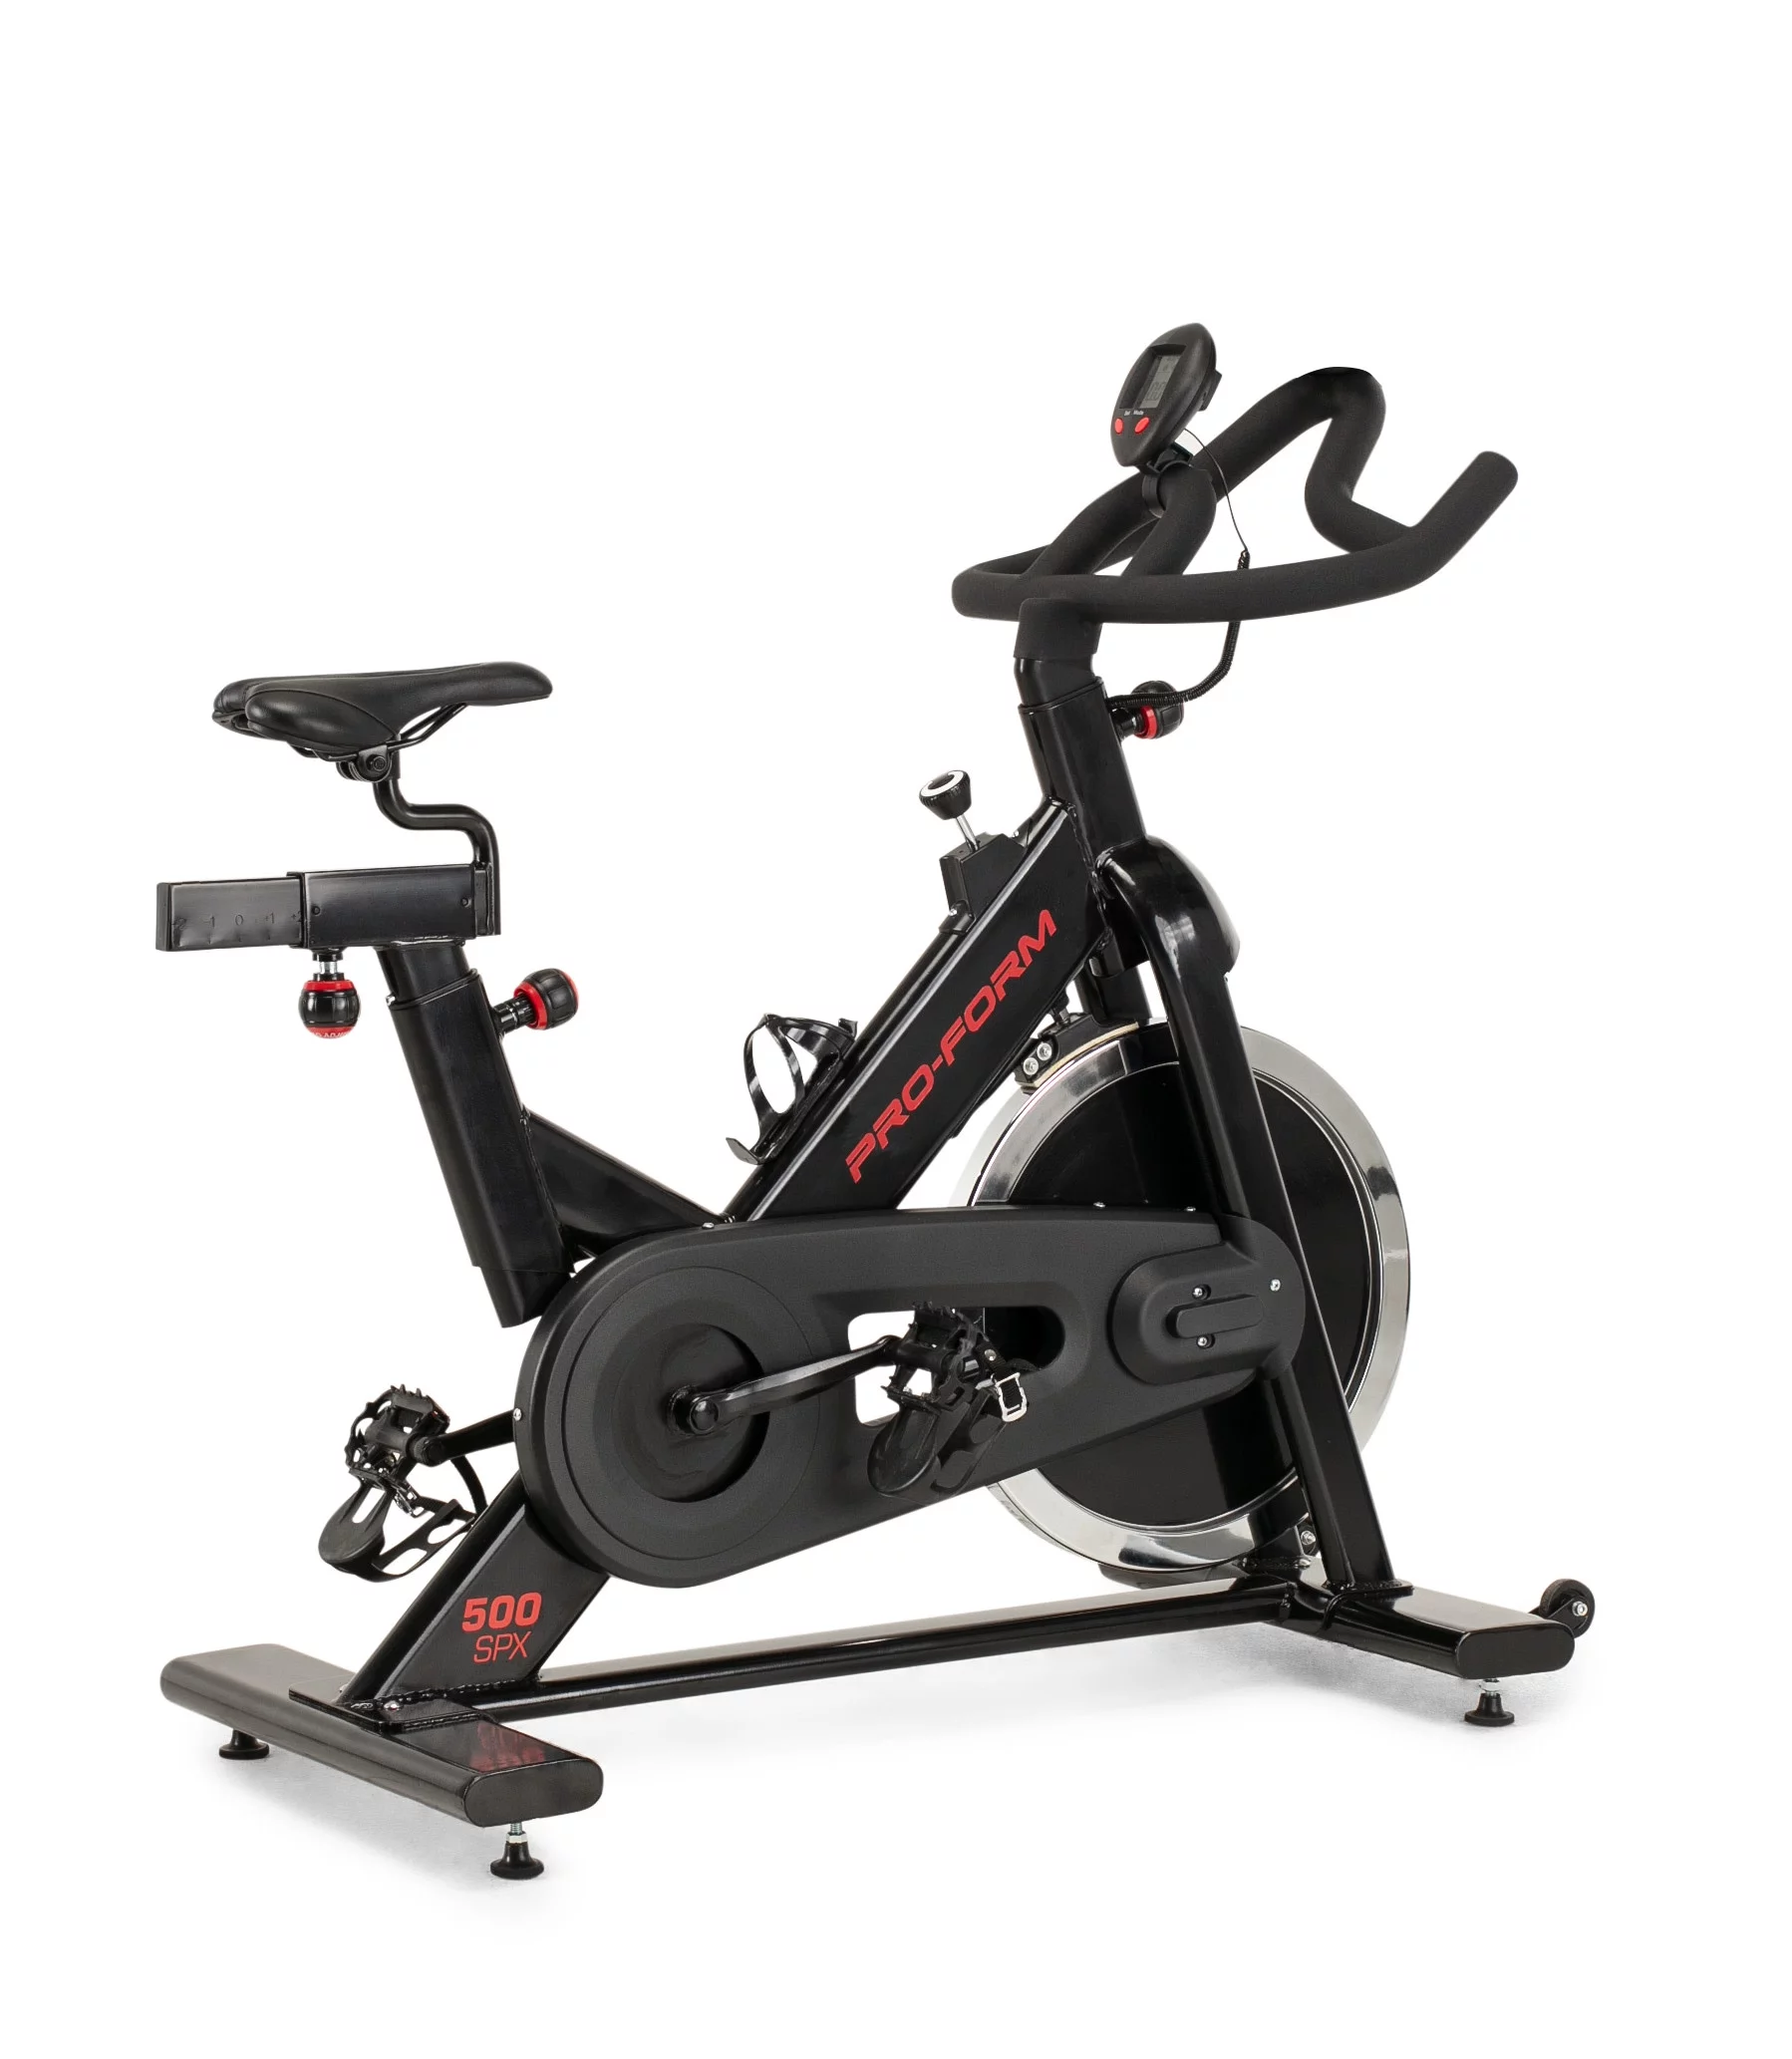 ProForm 500 SPX Exercise Bike Review: Compact and Affordable Fitness